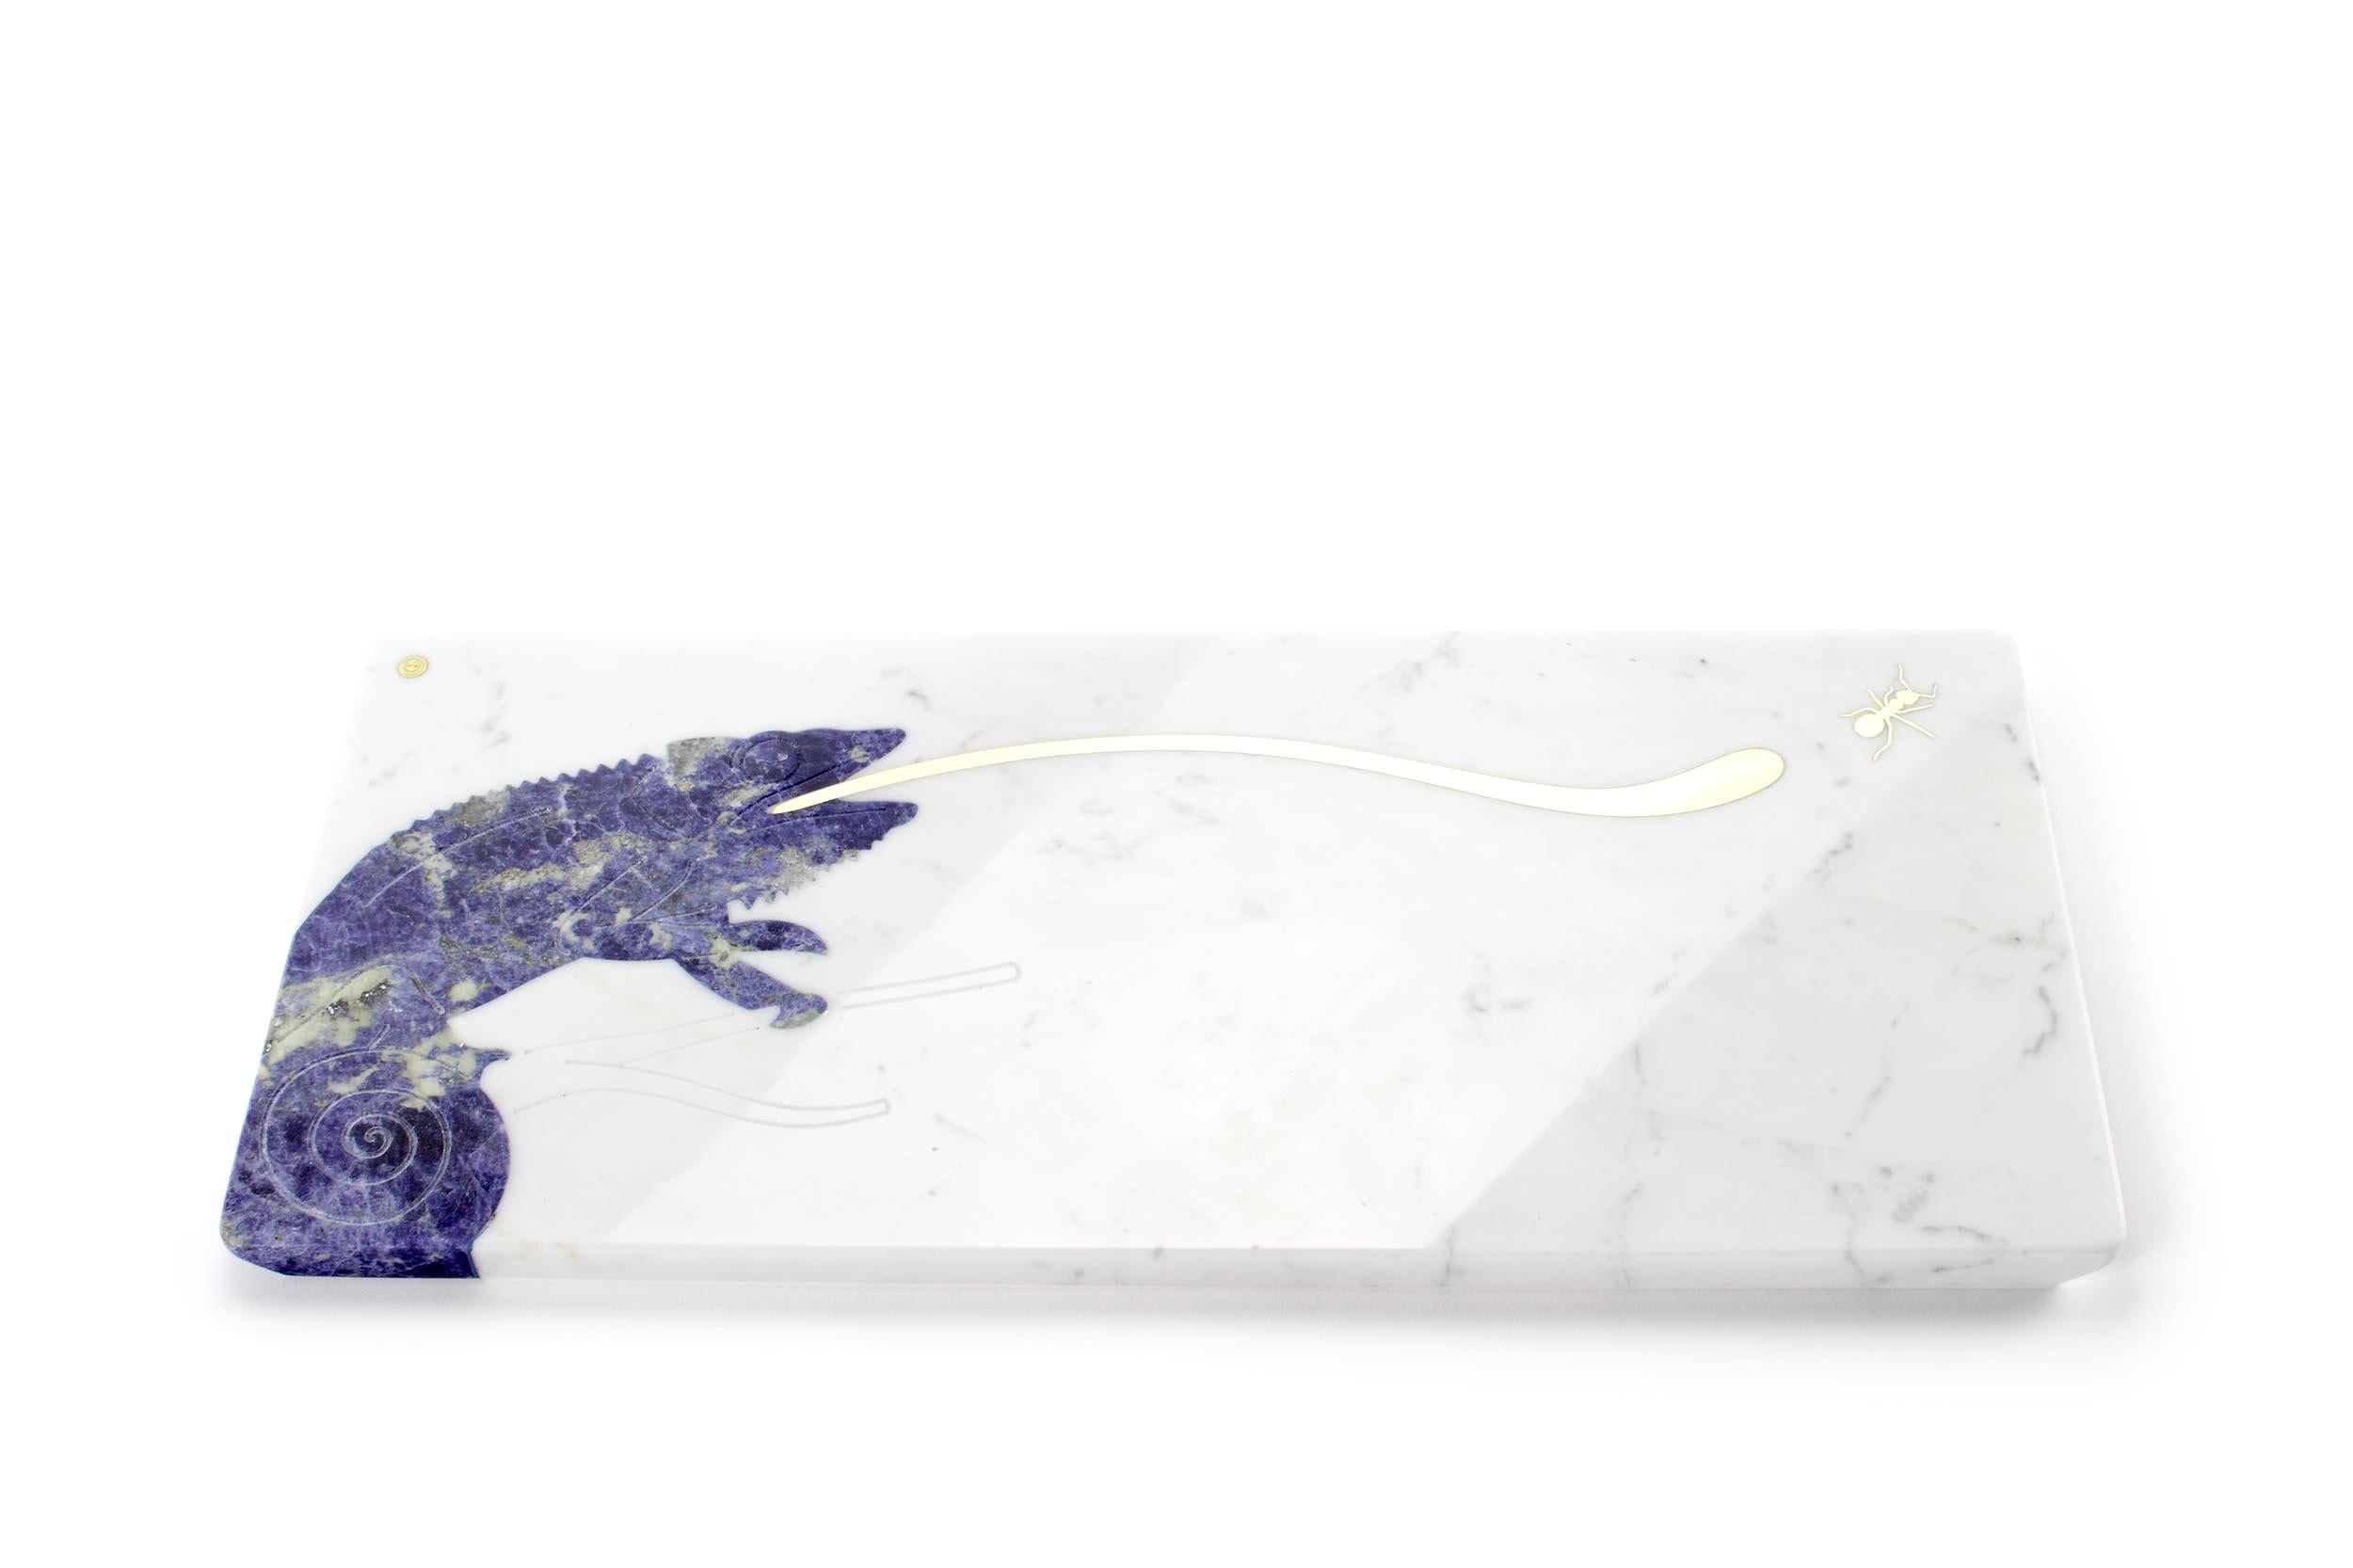 Centerpiece / serving plate in white Carrara marble with inlay in brushed brass and semi-precious gemstone Sodalite.

Dimensions: L 45, W 20.5, H 1.5 cm

100% Hand made in Italy. 

Marble is a natural material, every piece is unique as each marble